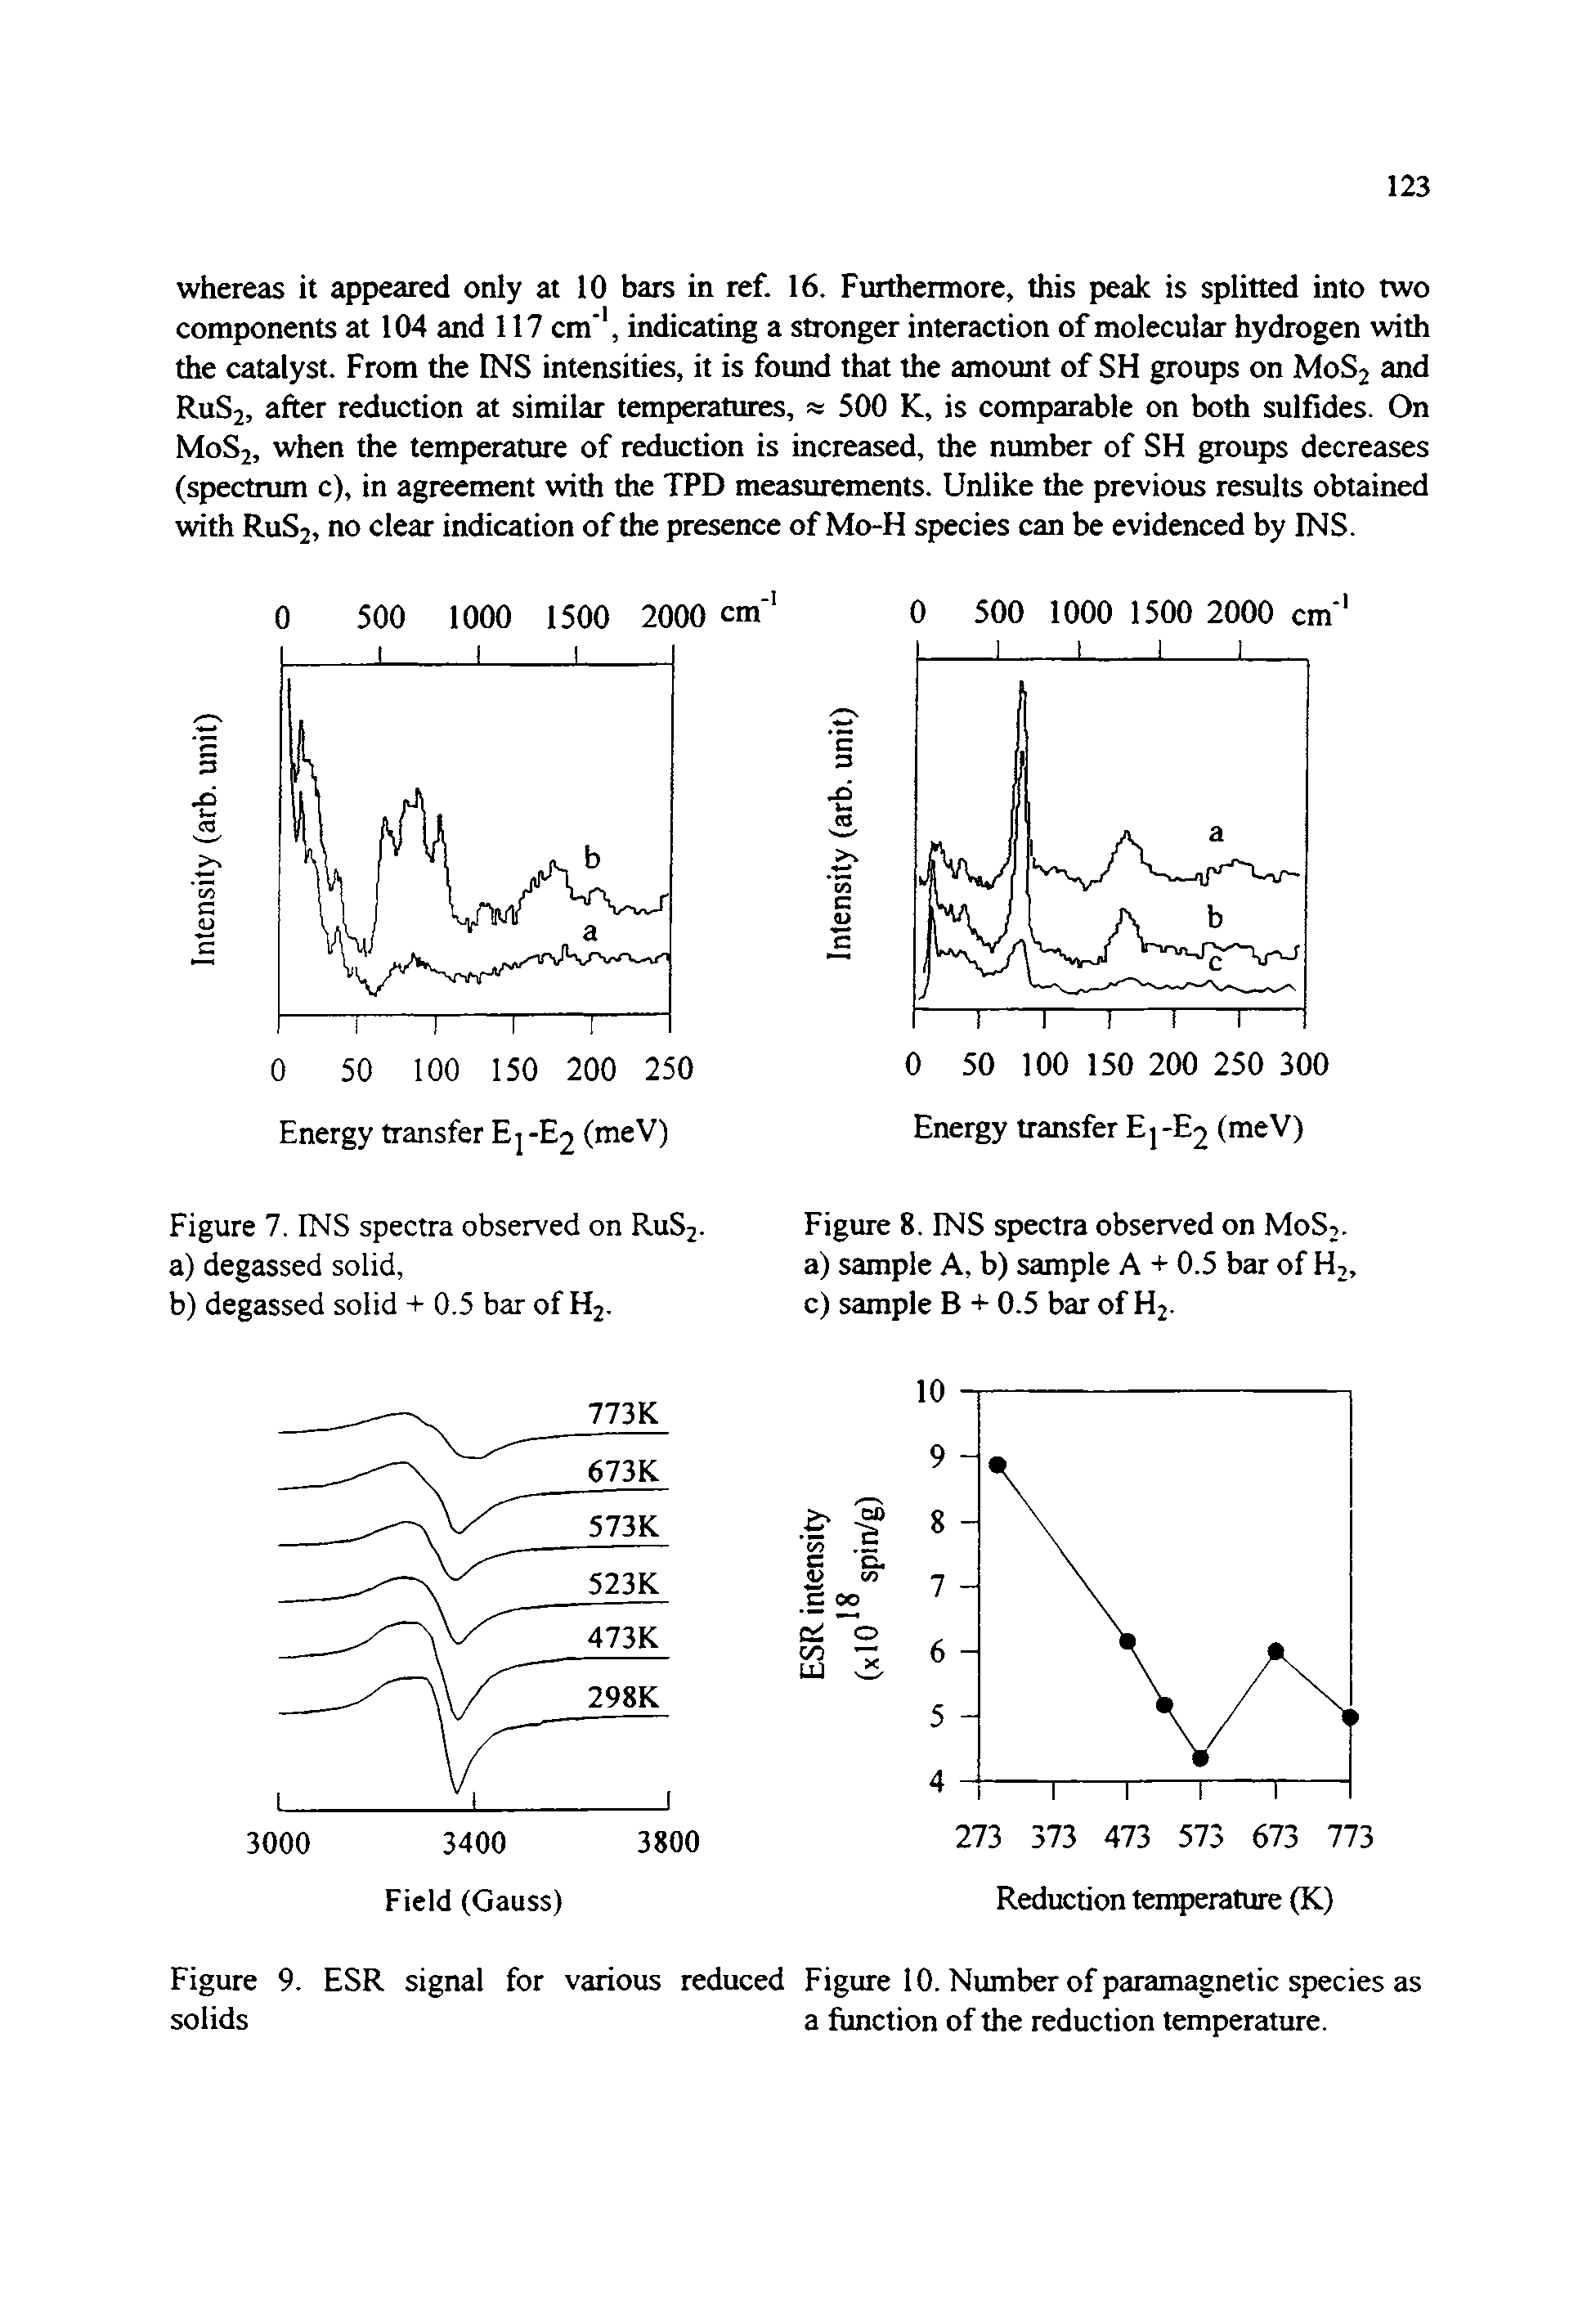 Figure 9. ESR signal for various reduced Figure 10. Number of paramagnetic species as solids a function of the reduction temperature.